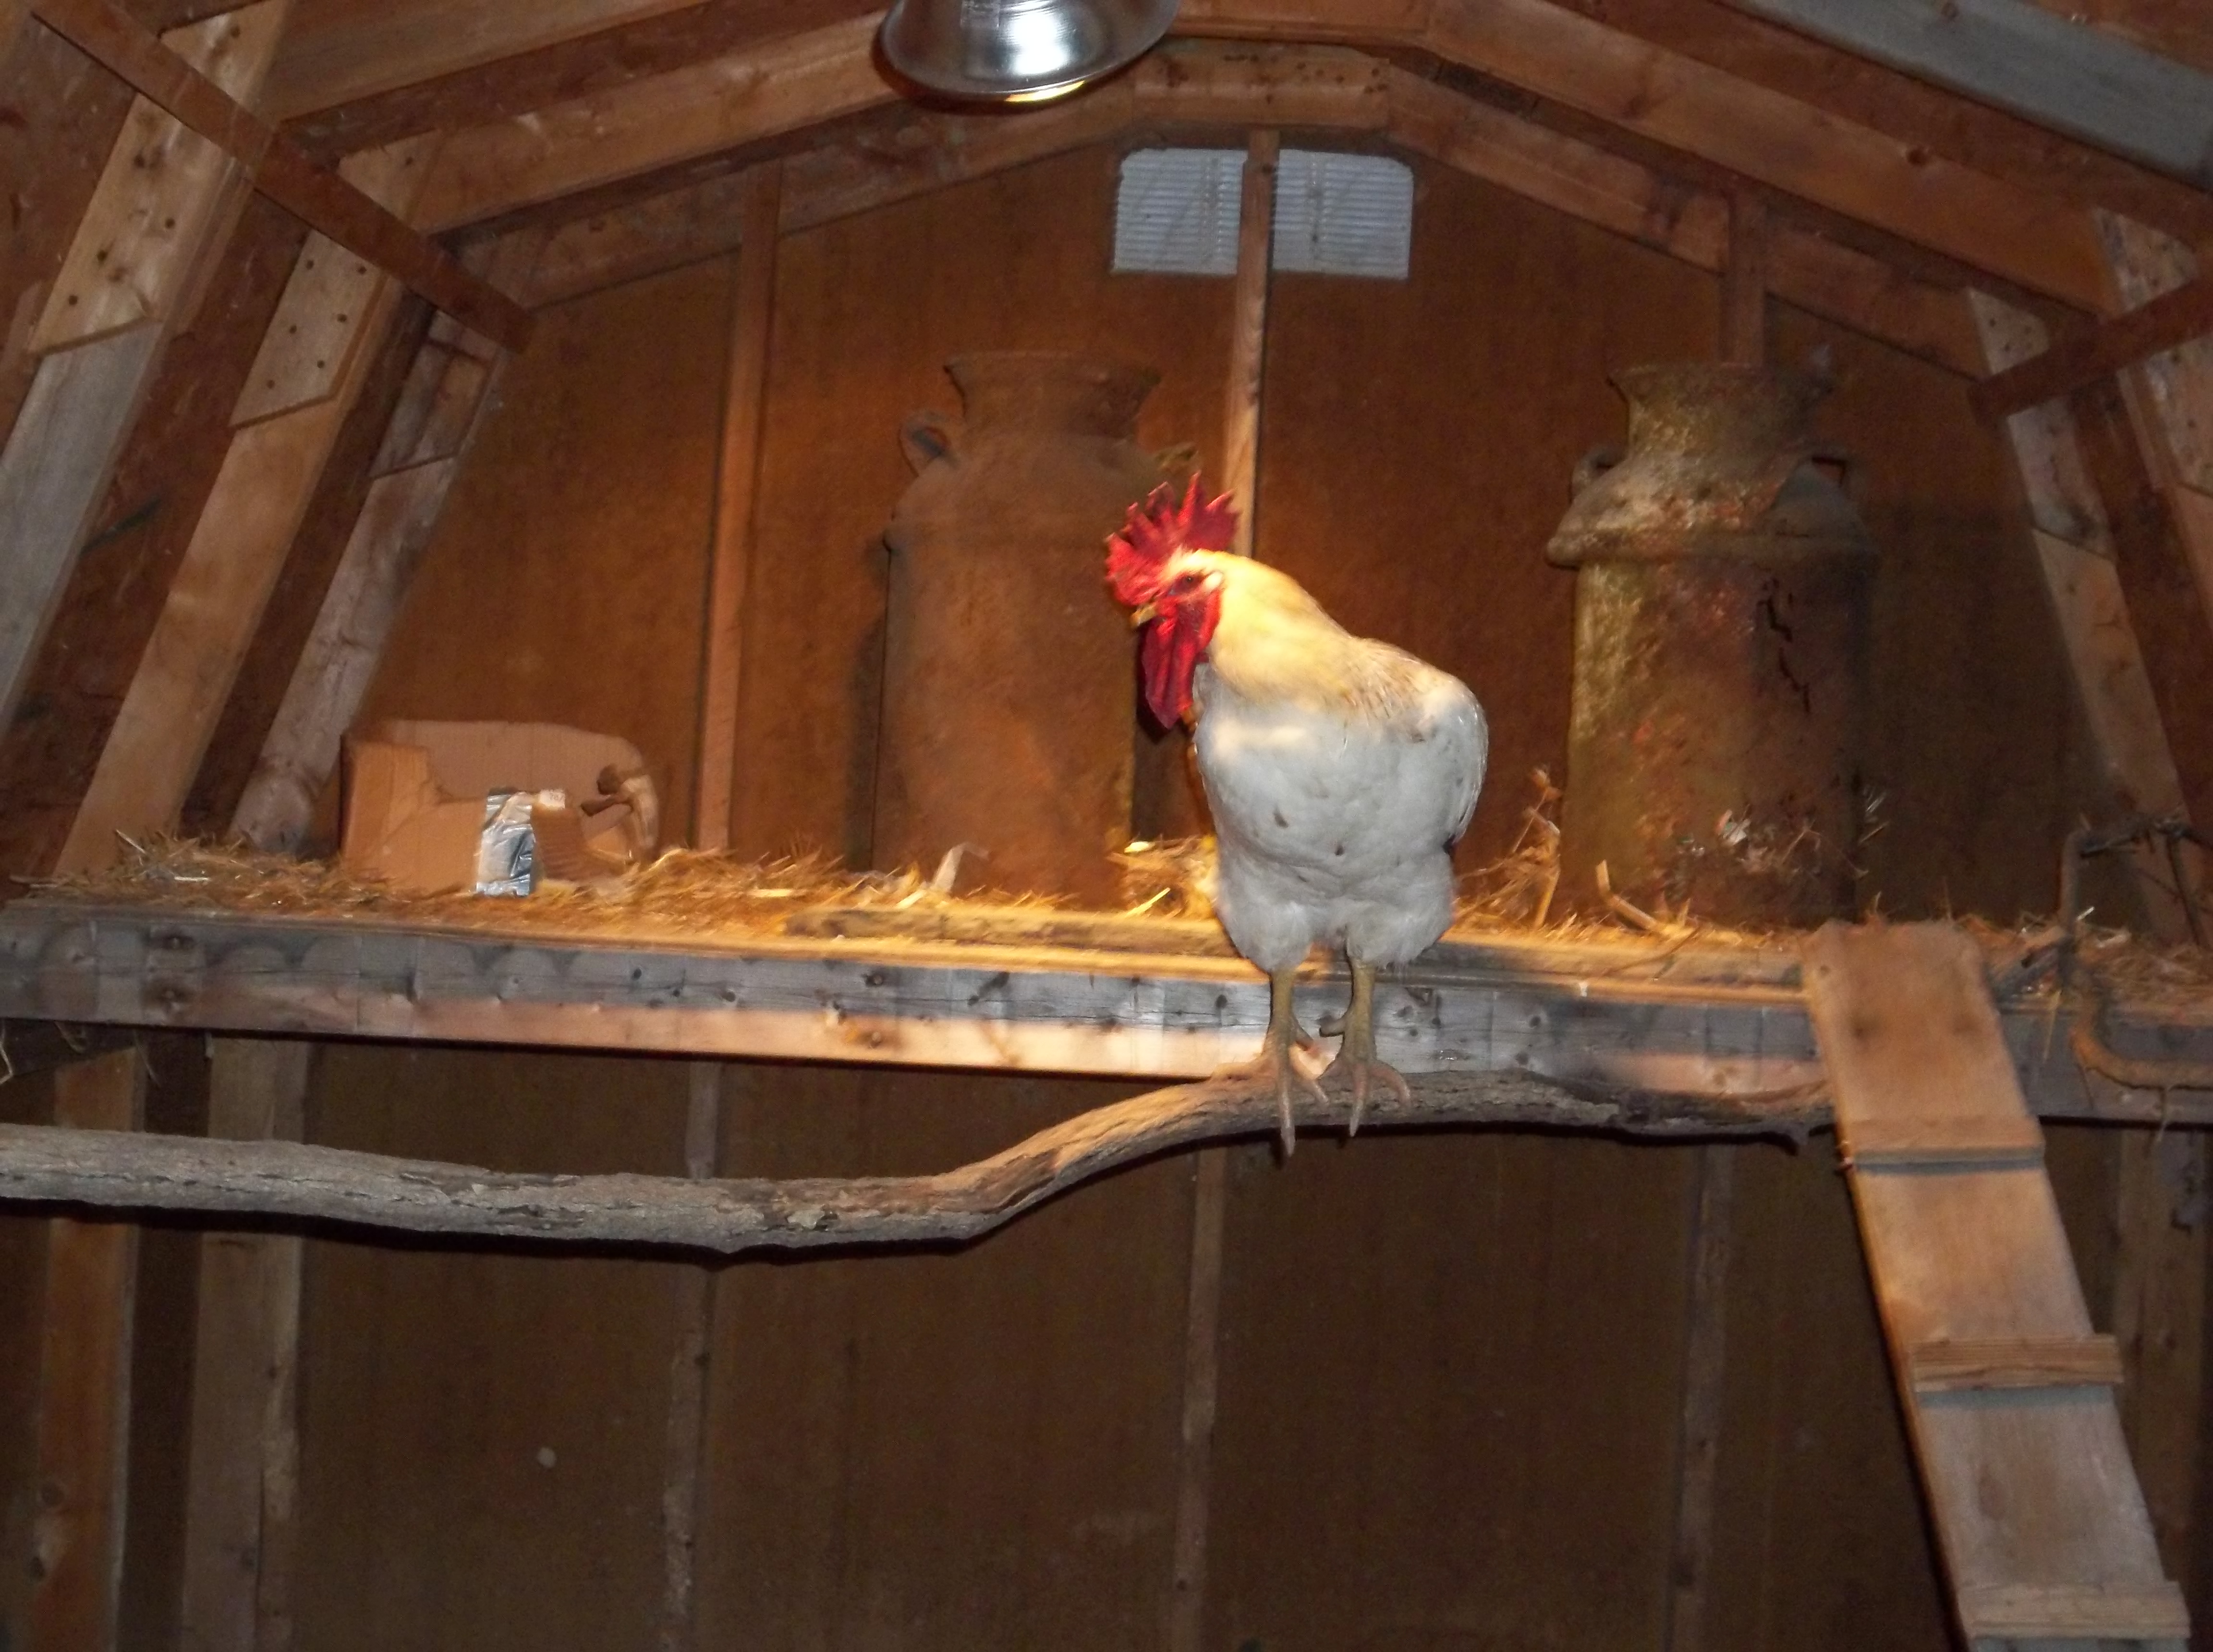 Here he is getting irritated and is talking to the hens... it IS BED TIME>